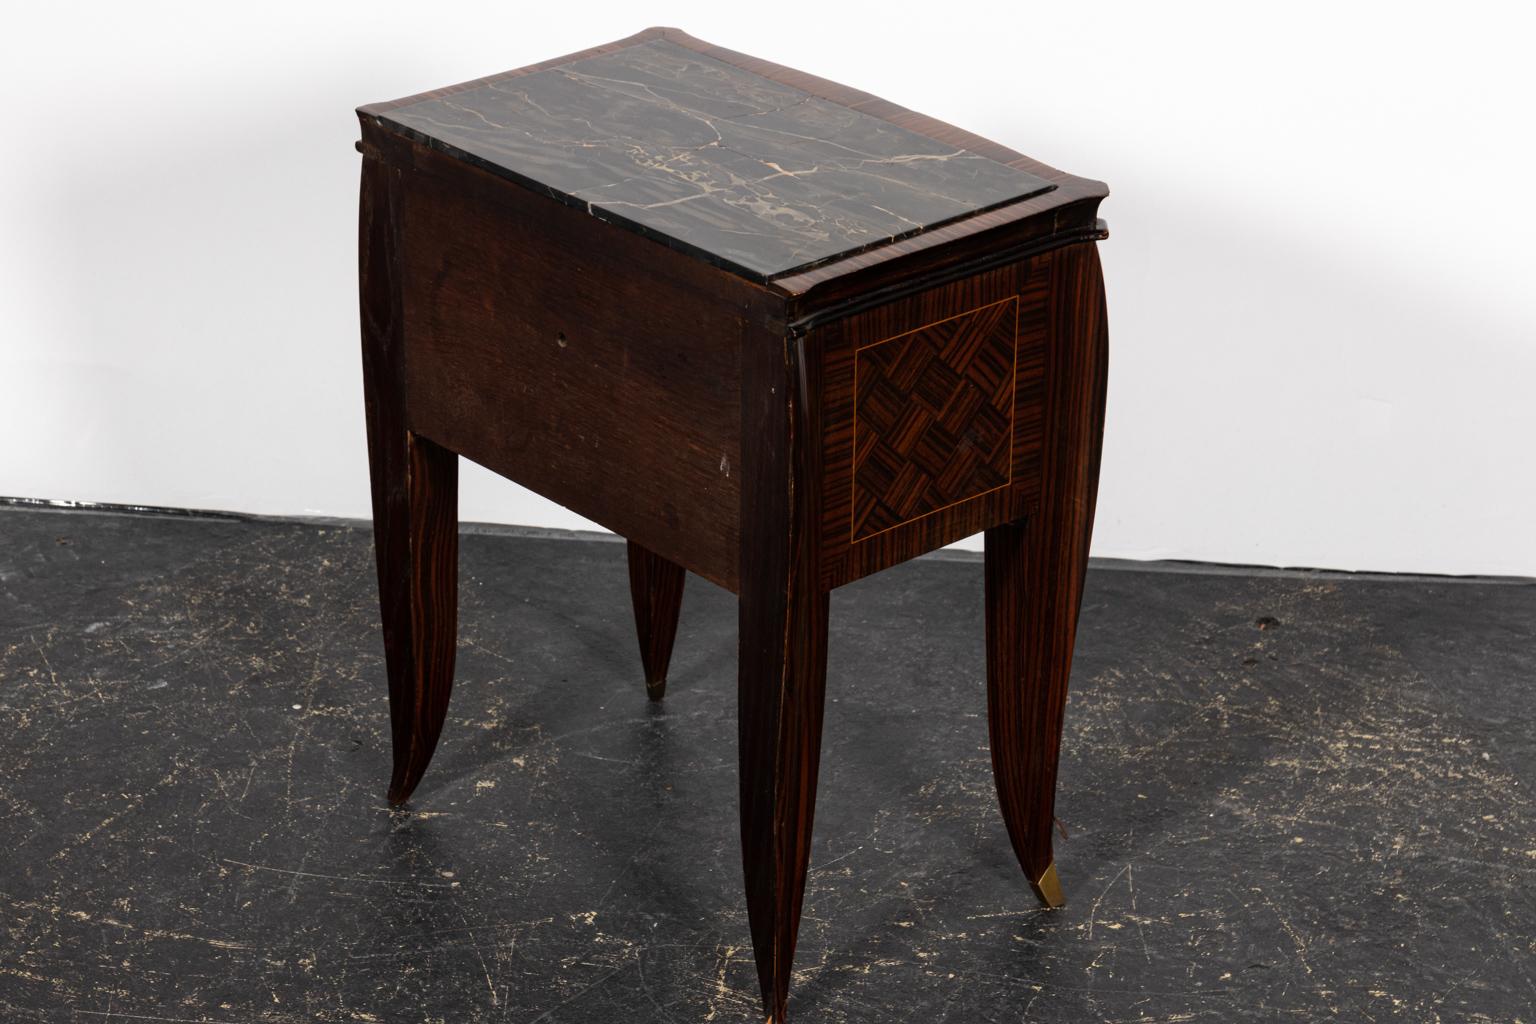 Pair of Art Deco style nightstands with a single drawer. The piece also features diamond shaped detail on the drawer front. Please note of wear consistent with age including chips and minor finish loss.